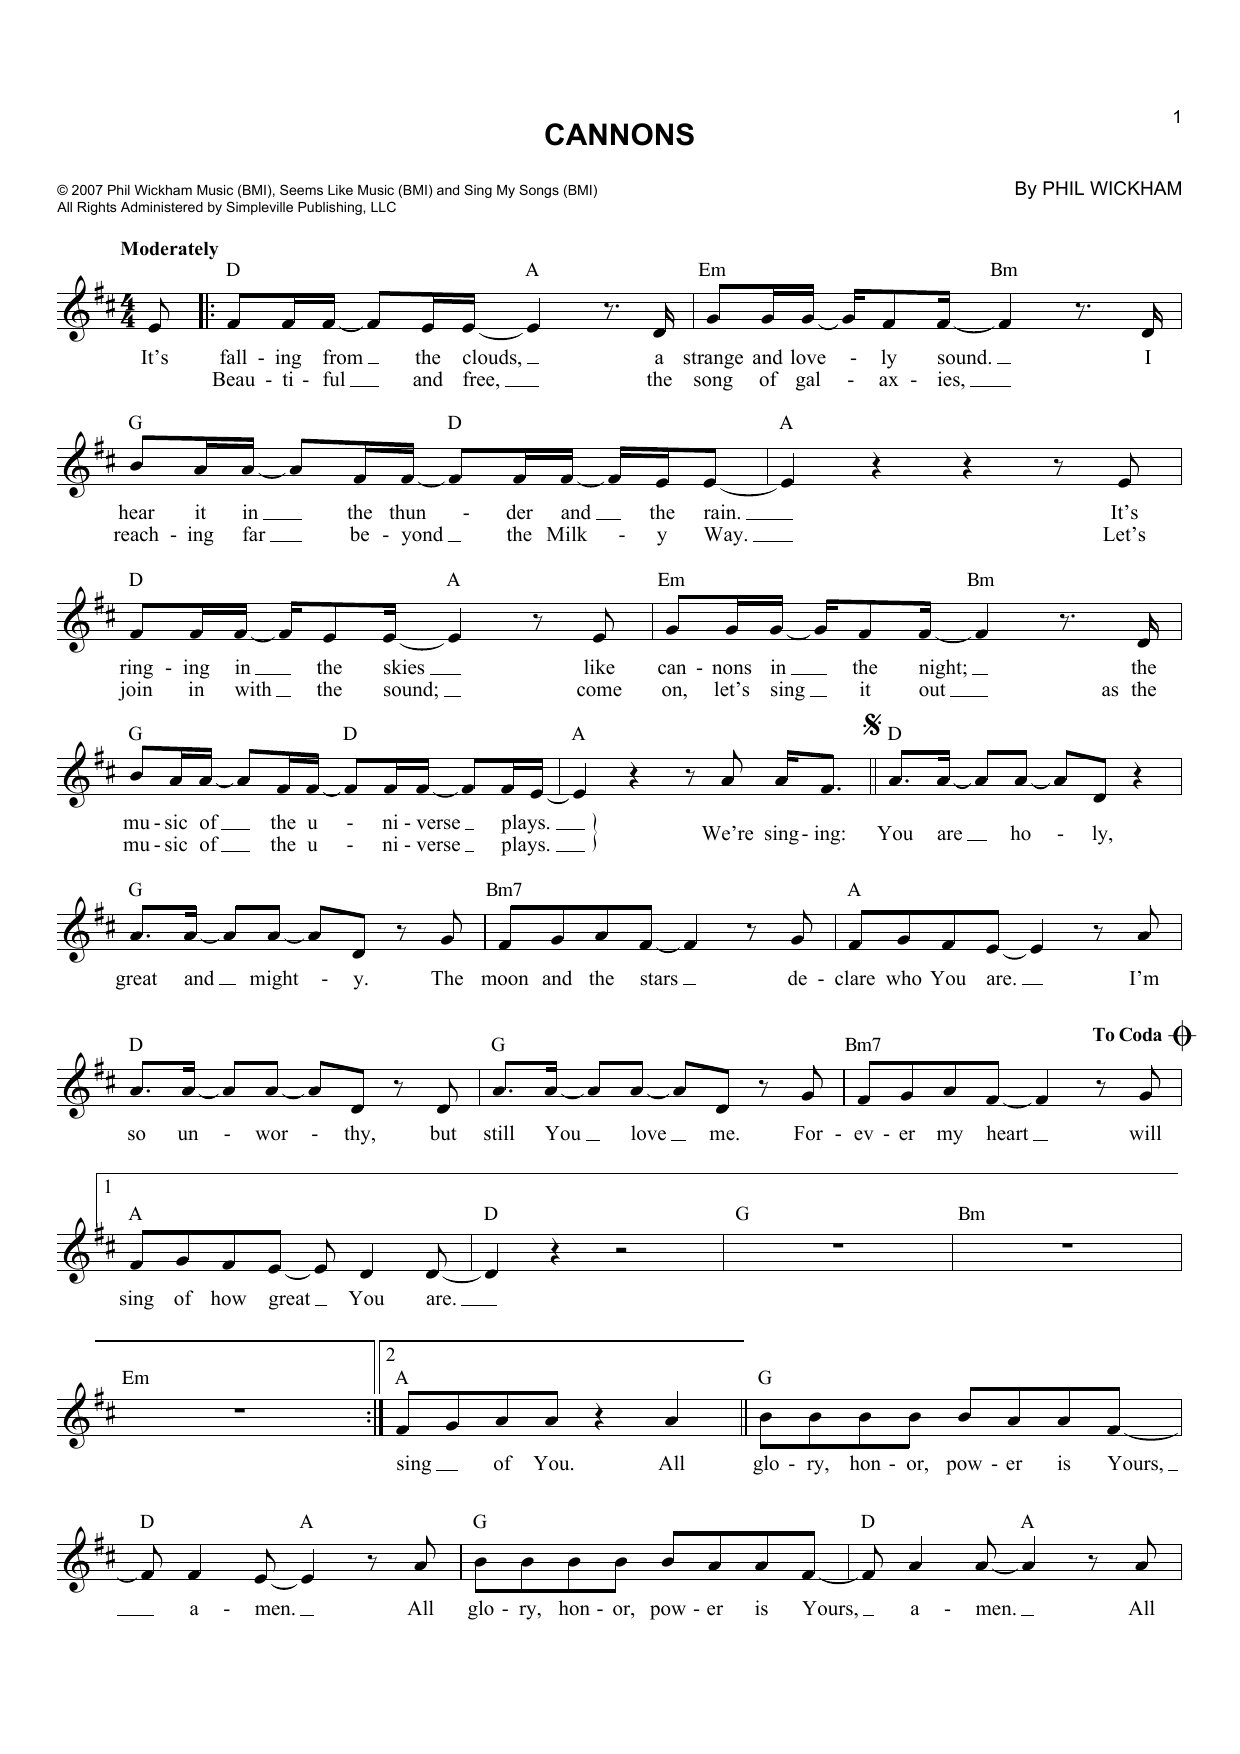 Download Phil Wickham Cannons Sheet Music